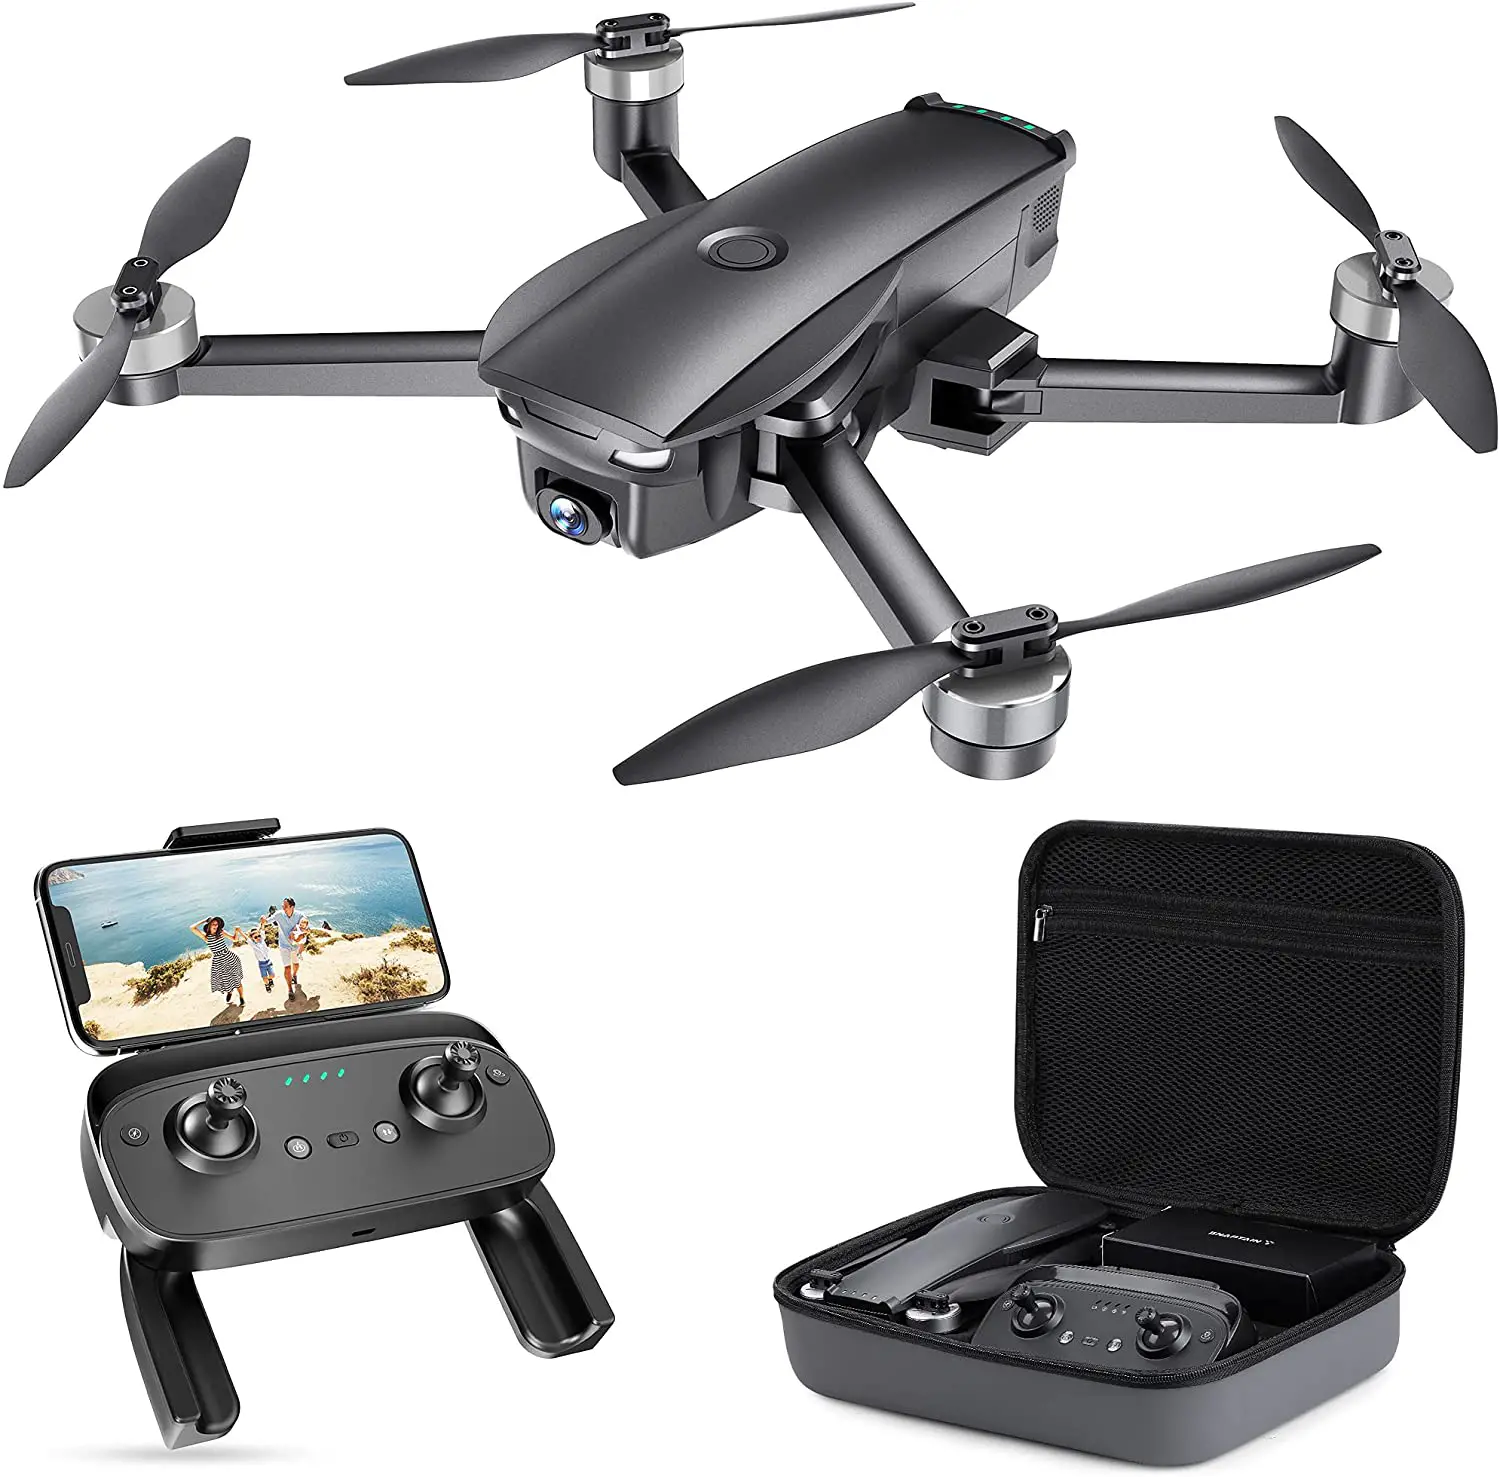 SNAPTAlN SP7100 Foldable GPS Drone with 4K